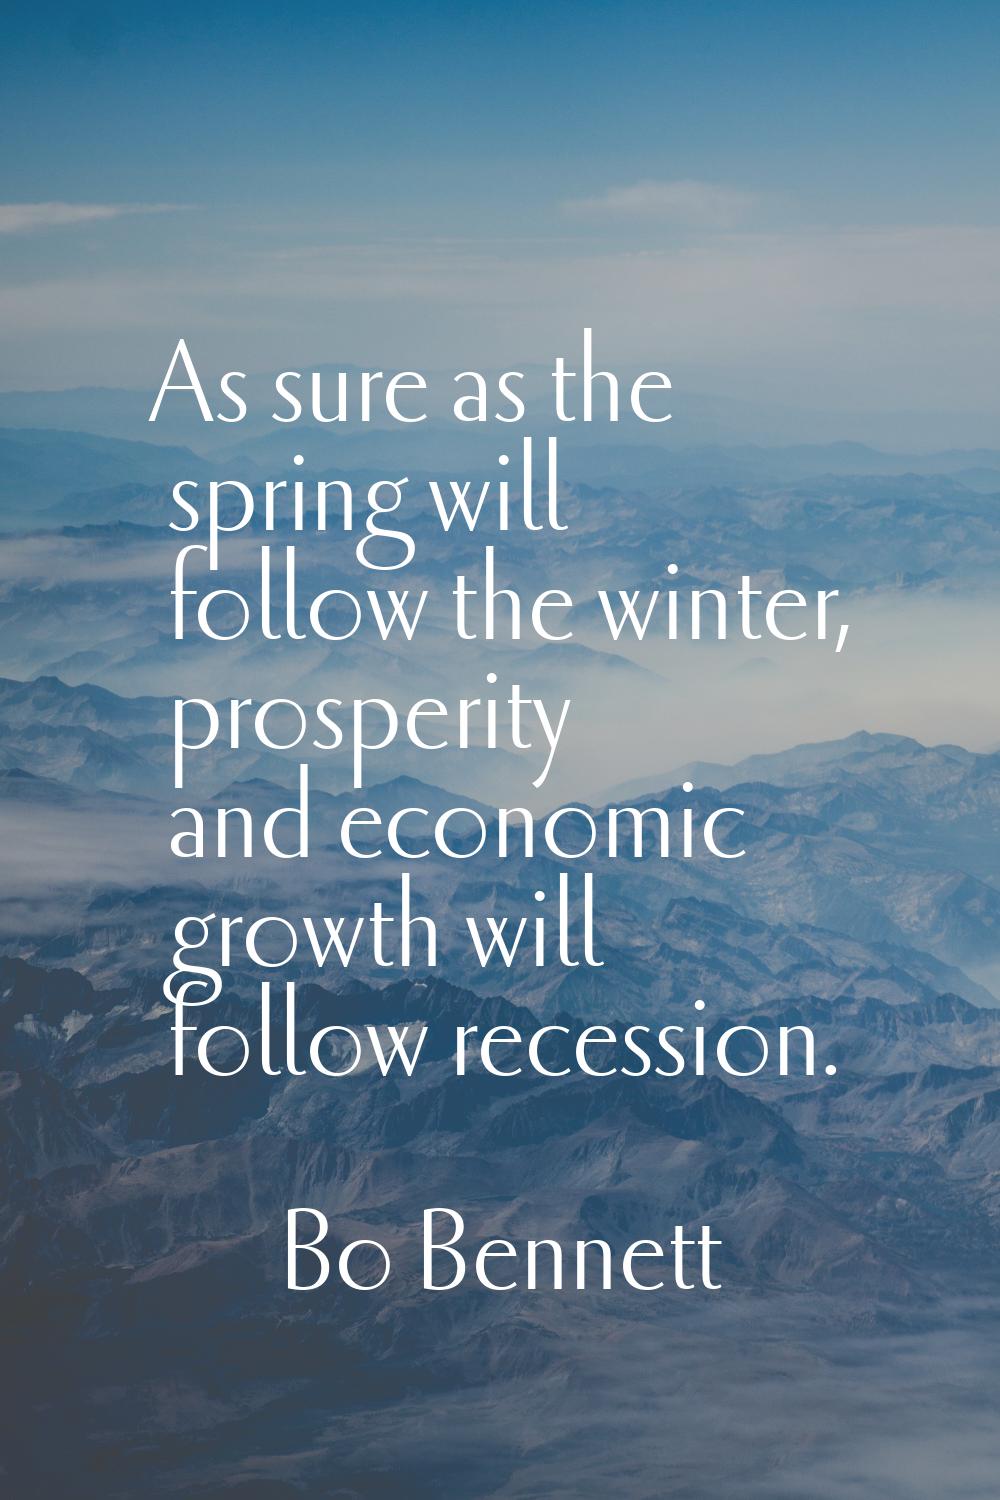 As sure as the spring will follow the winter, prosperity and economic growth will follow recession.